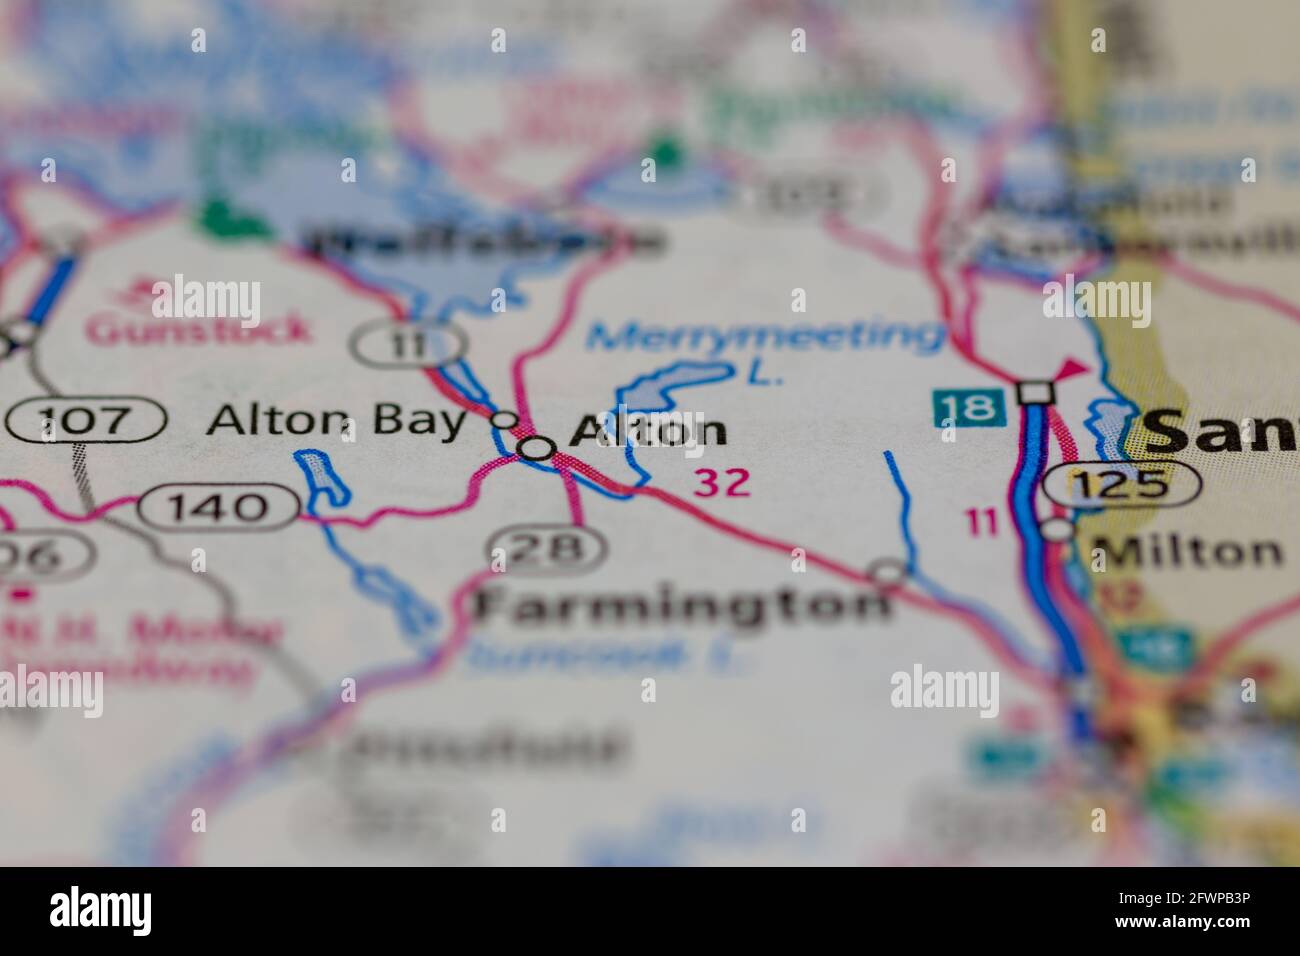 Alton New Hampshire Usa Shown On A Geography Map Or Road Map 2FWPB3P 